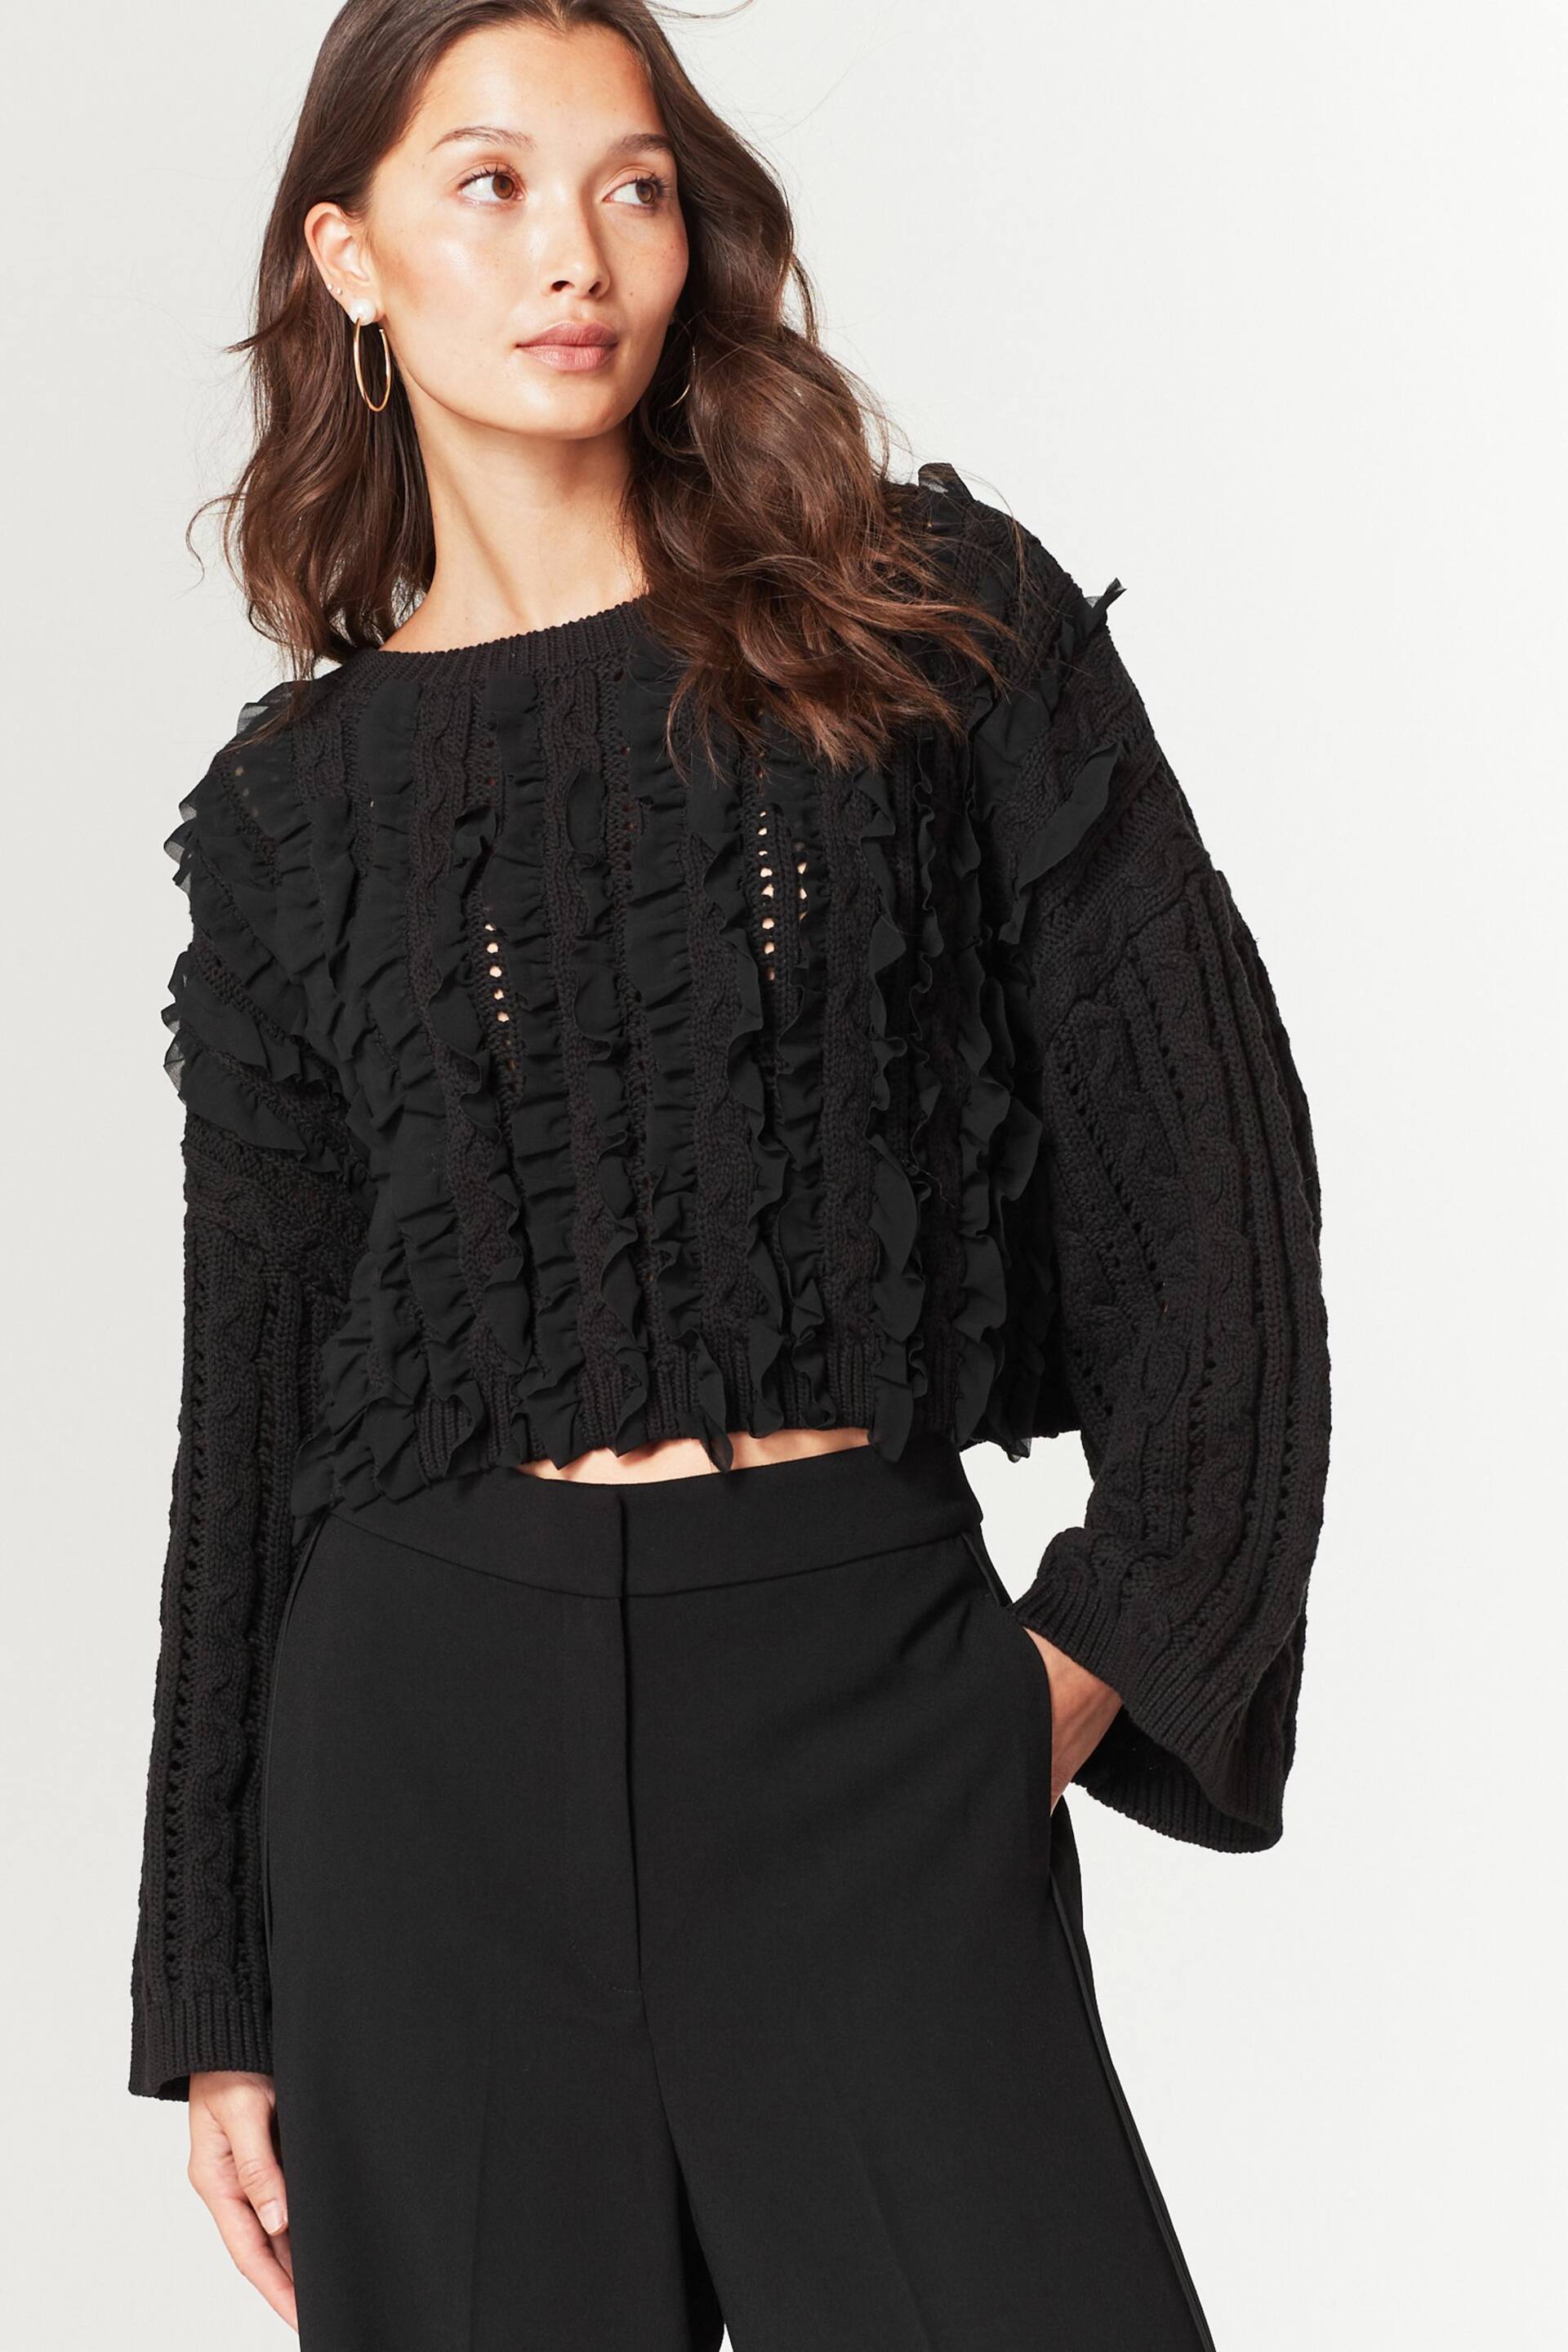 Black Ruffle Cable Long Sleeve Jumper - Image 1 of 6